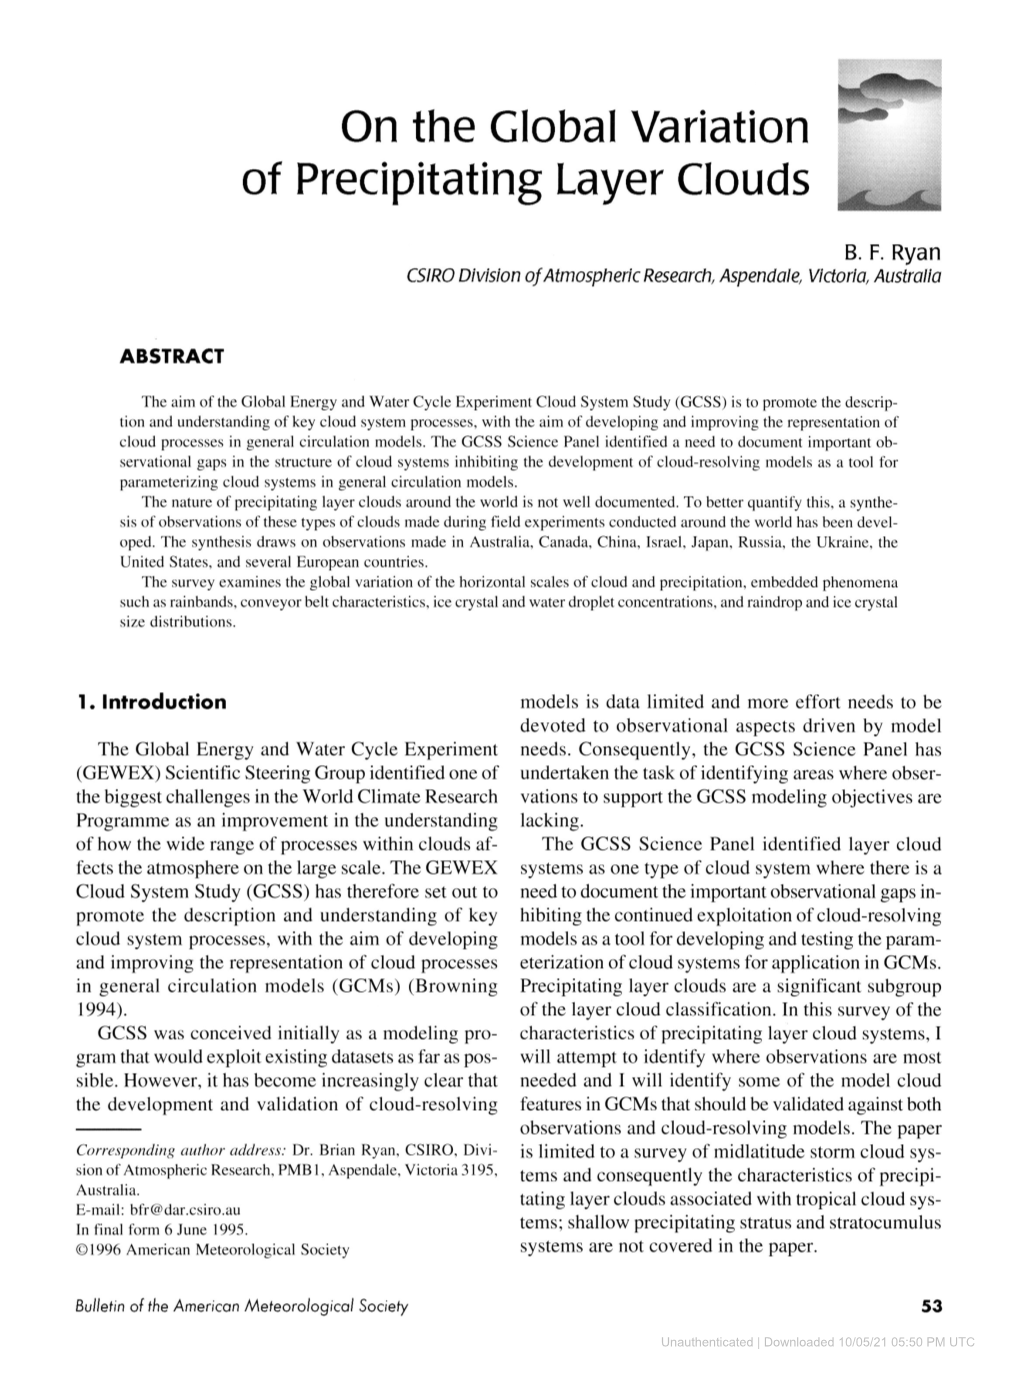 On the Global Variation of Precipitating Layer Clouds C €